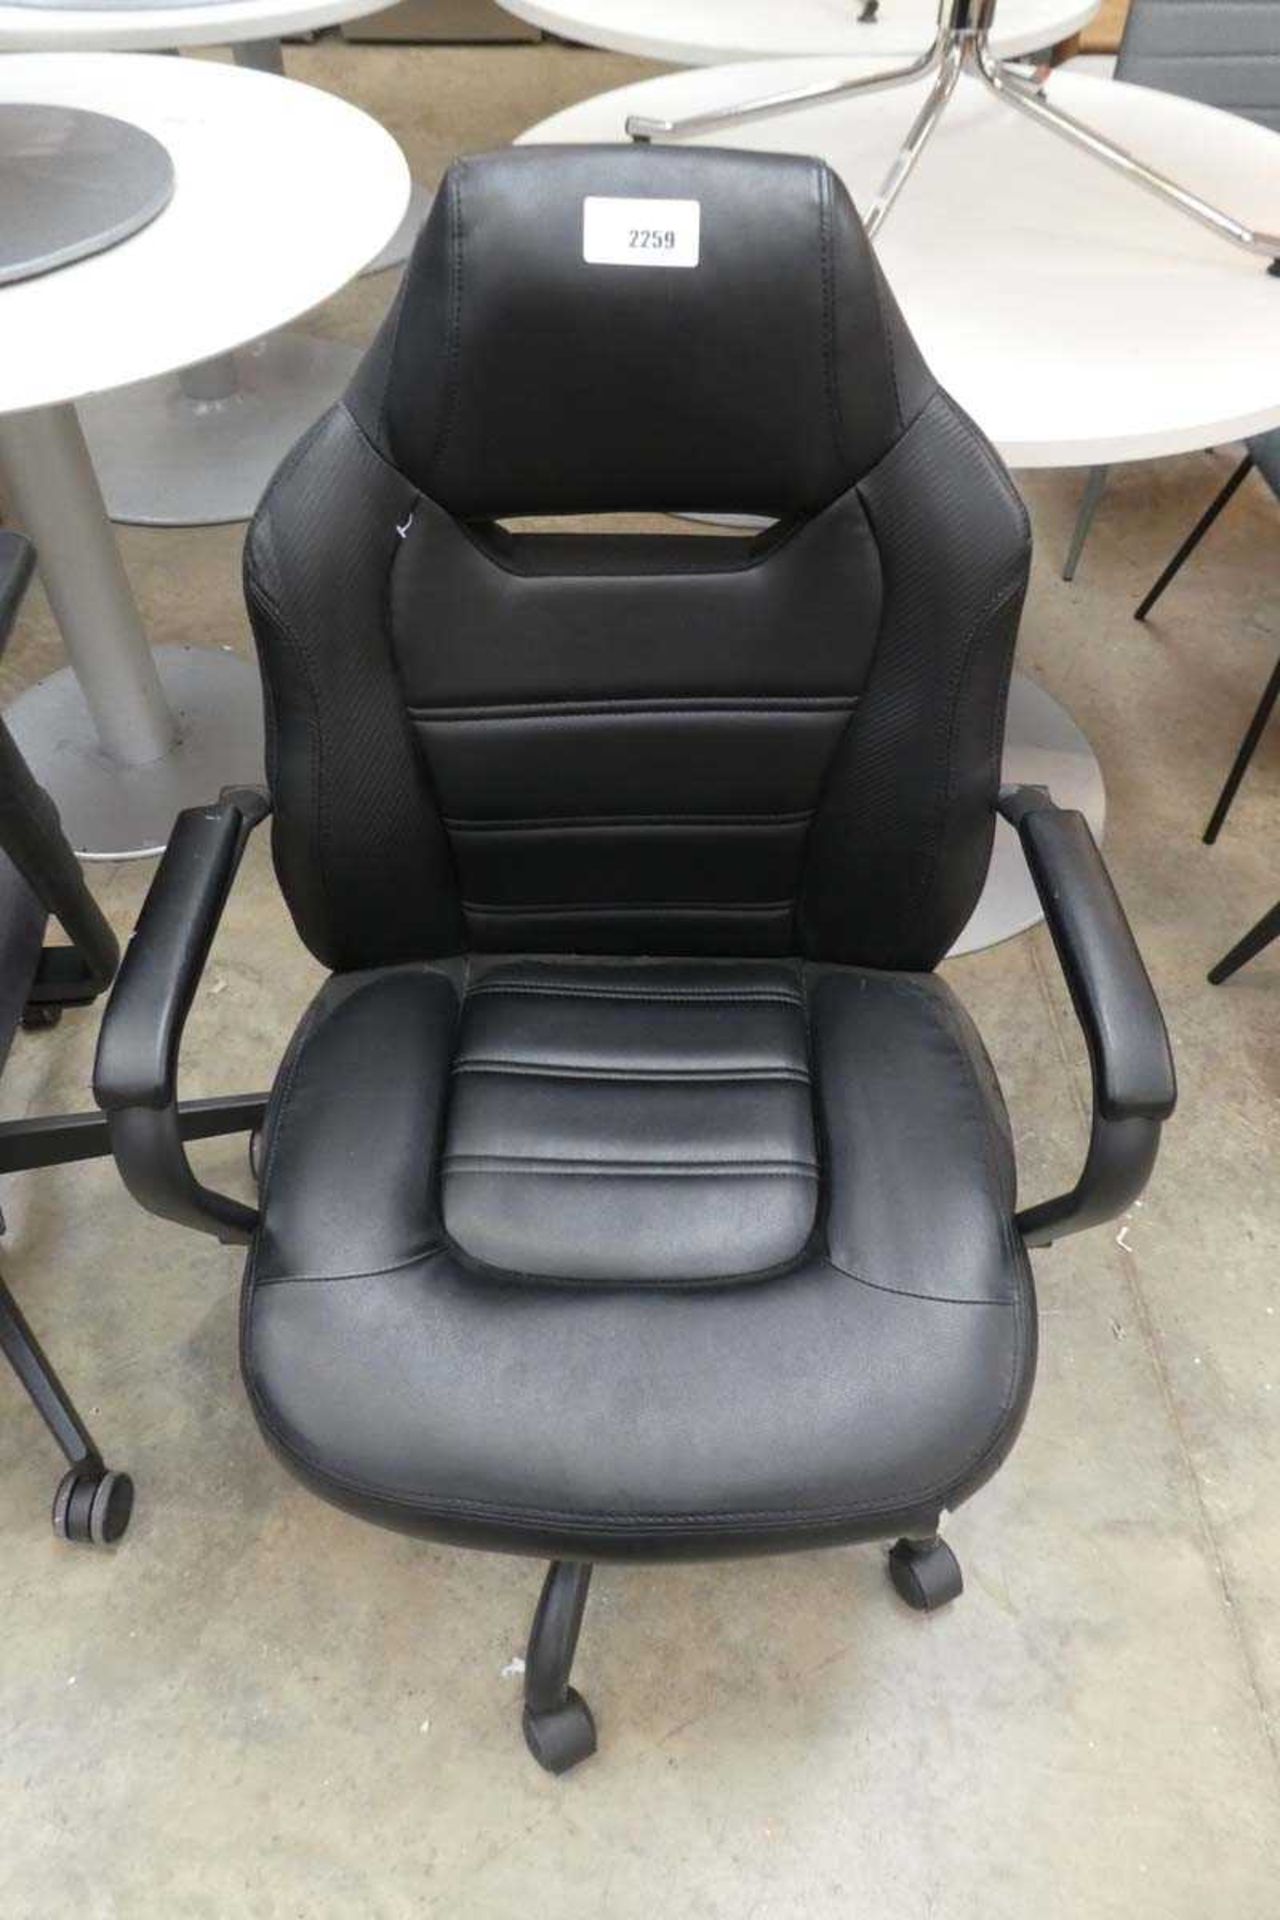 +VAT True Innovations black leatherette twin arm office chair on 5 star base